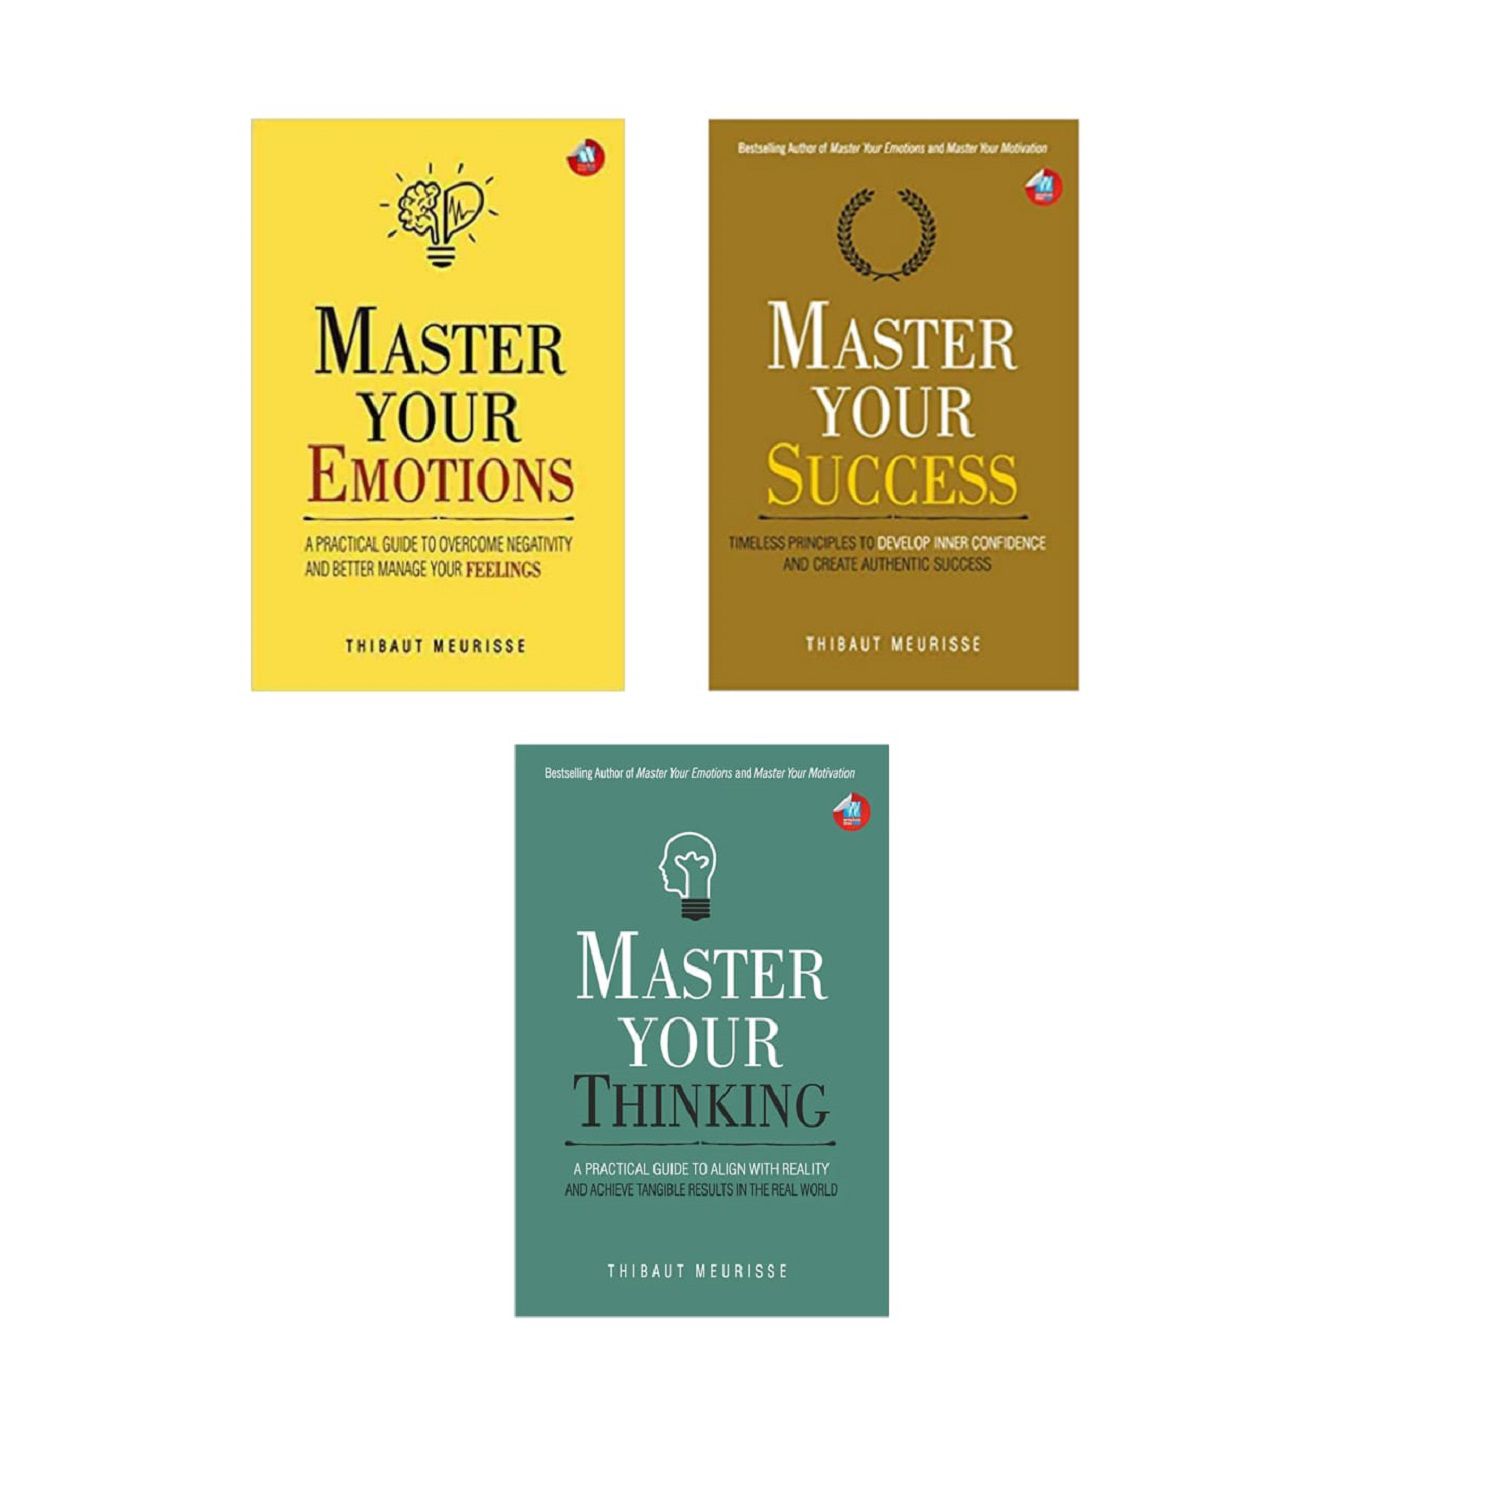     			( Mastery Series Book 3 Pack ) Master Your Emotions & Master Your Thinking & Master Your Success  1 January 2021 -- Paperback ( Thibaut Meurisse)